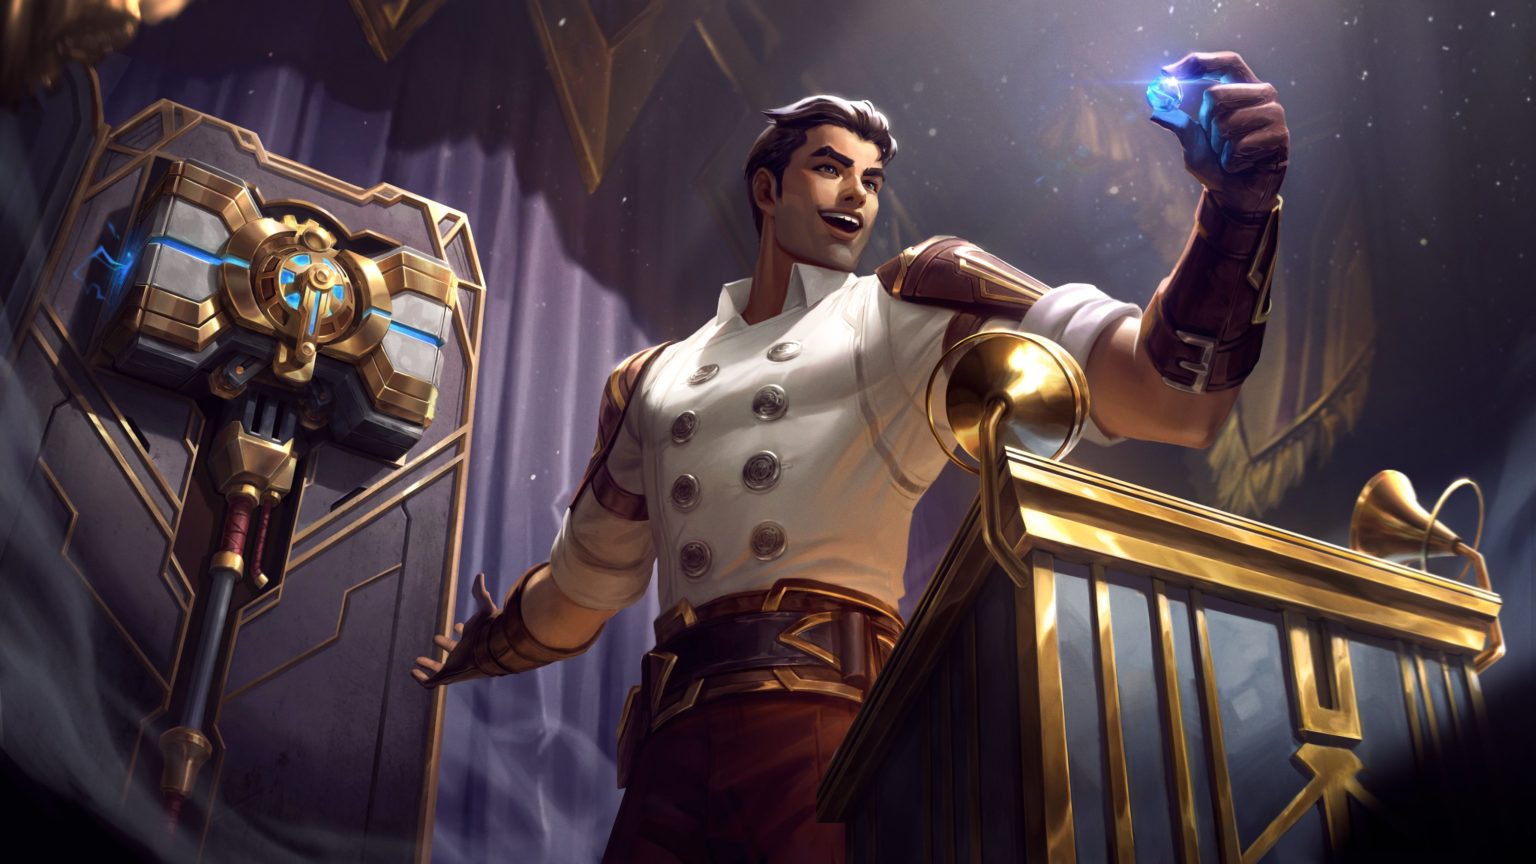 Riot has revealed skins for Jayce, Vi based on the upcoming Netflix series Arcane!